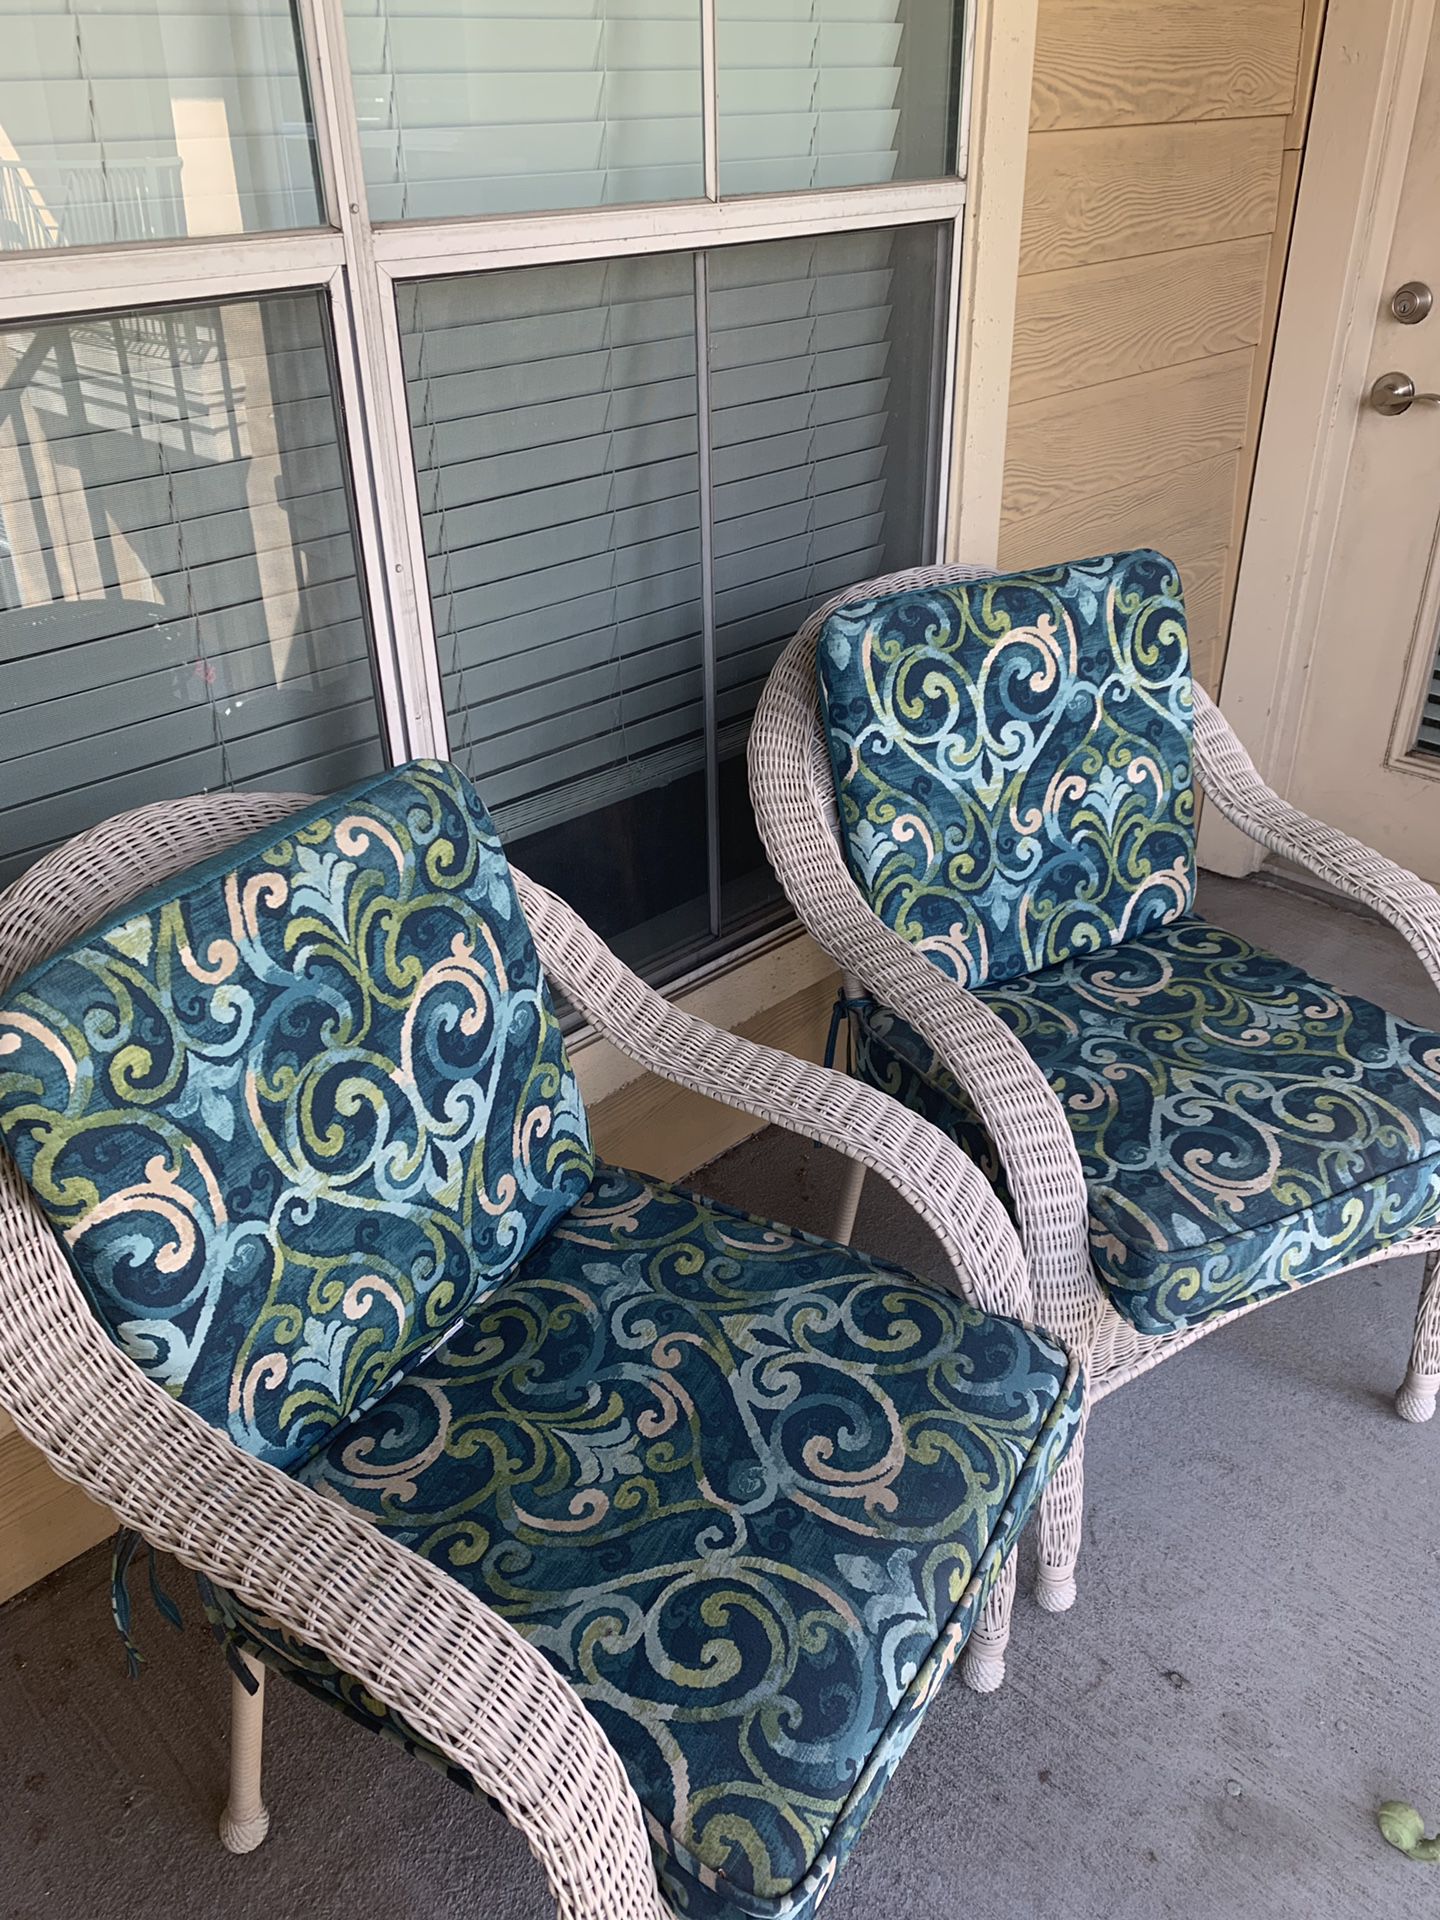 2 Outdoor Wicker Chairs with Cushions